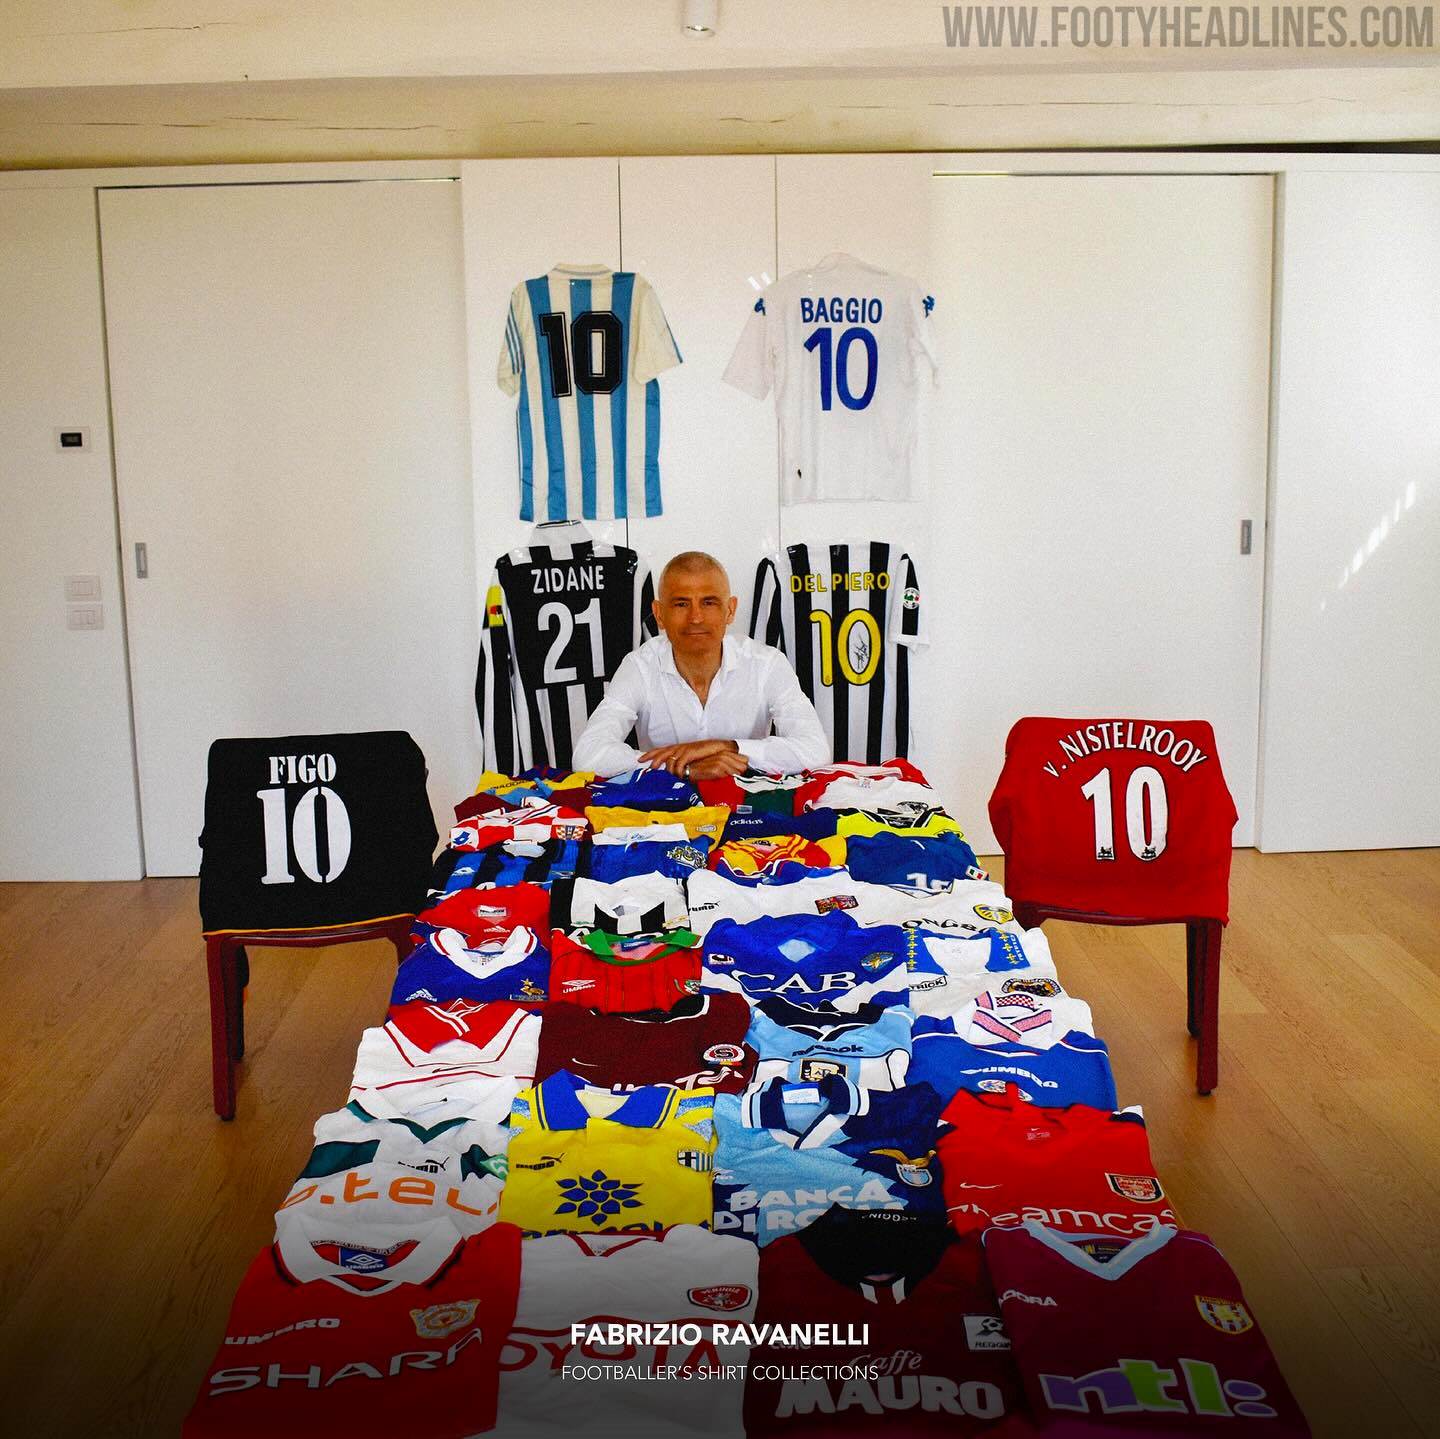 Impressive Footballers' Shirt Collection - Footy Headlines